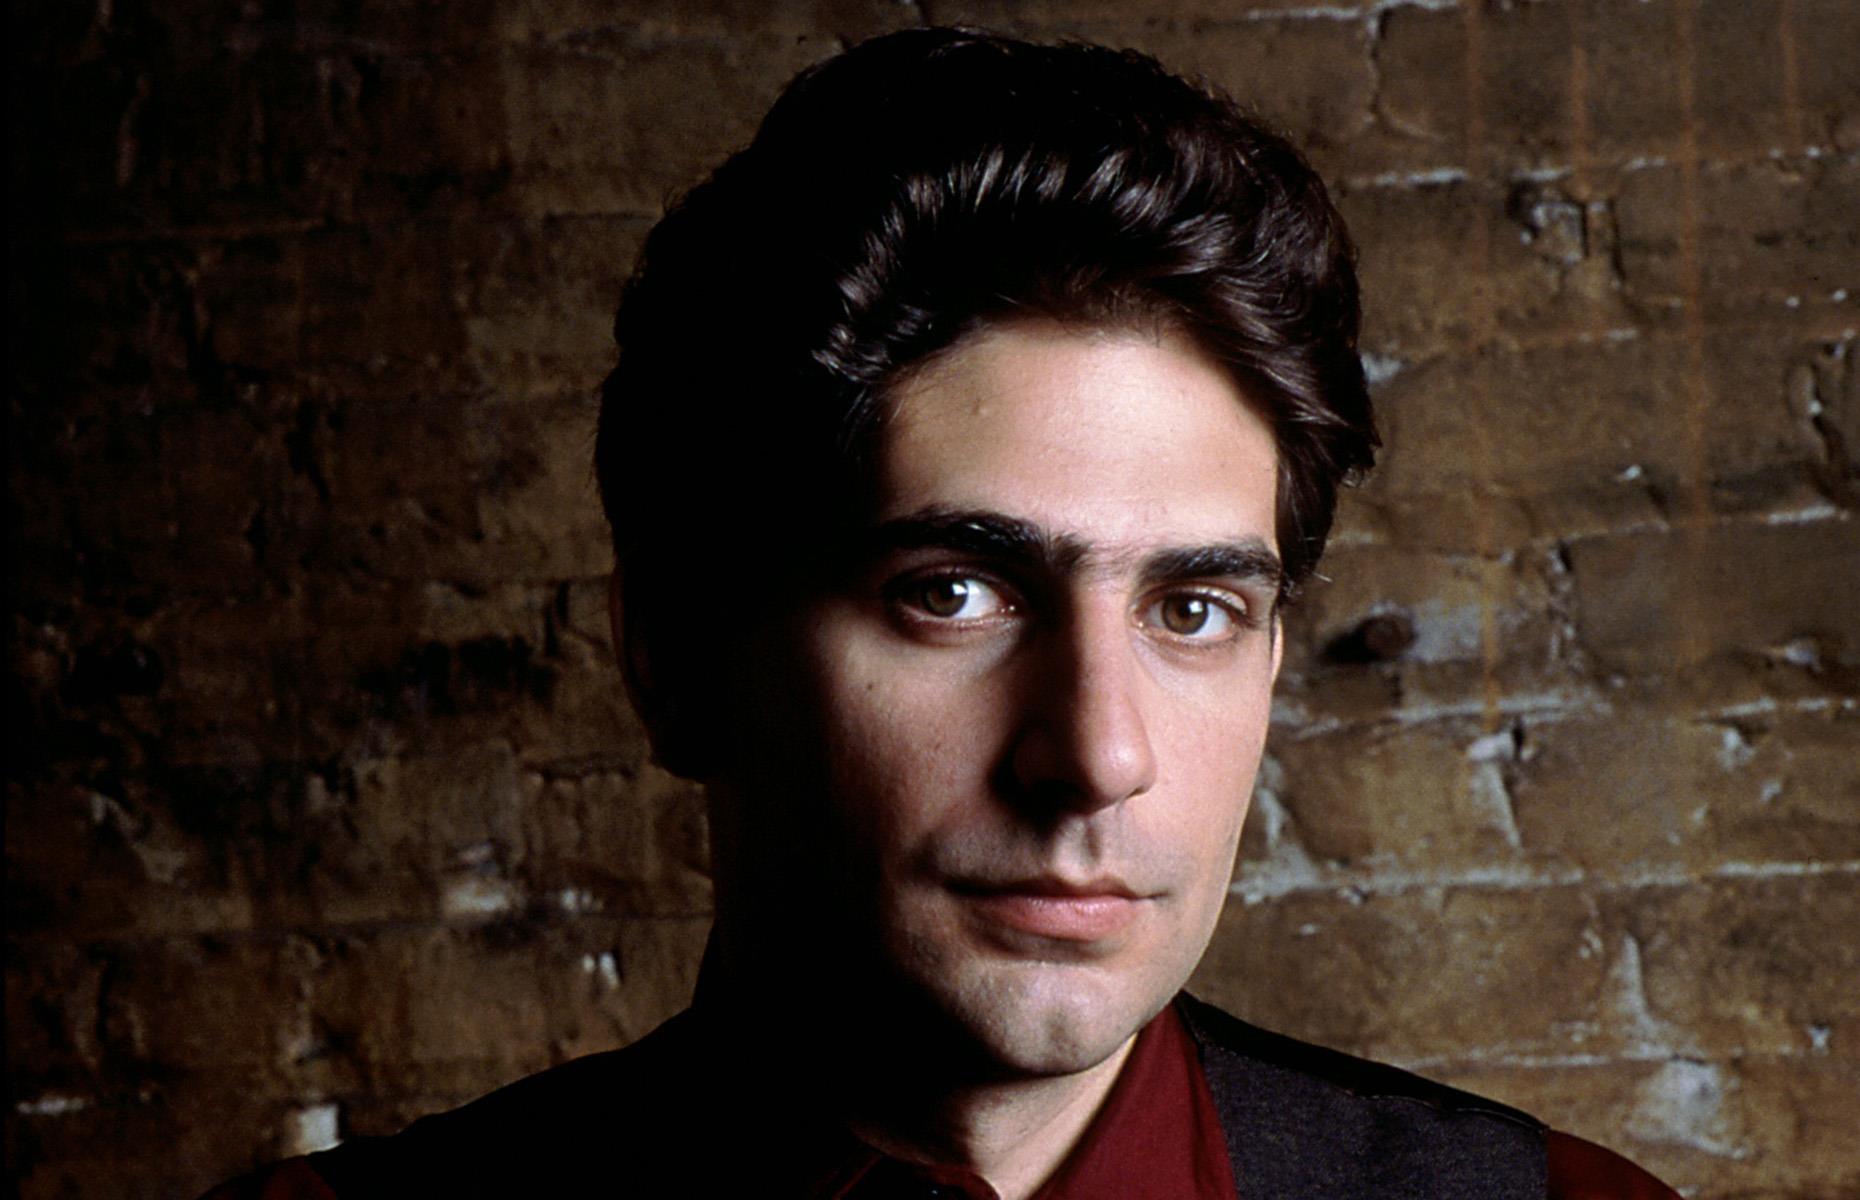 <p>Michael Imperioli played mobster Christopher Moltisanti throughout all six seasons of <em>The Sopranos. </em>The gritty role landed him an Emmy award for Outstanding Supporting Actor in a Drama Series in 2004.</p>  <p>Imperioli made his screen debut in the 80s drama flick <em>Alexa</em>, and had already appeared in the likes of <em>GoodFellas</em> and <em>Malcolm X </em>before landing his part in the HBO crime saga.</p>